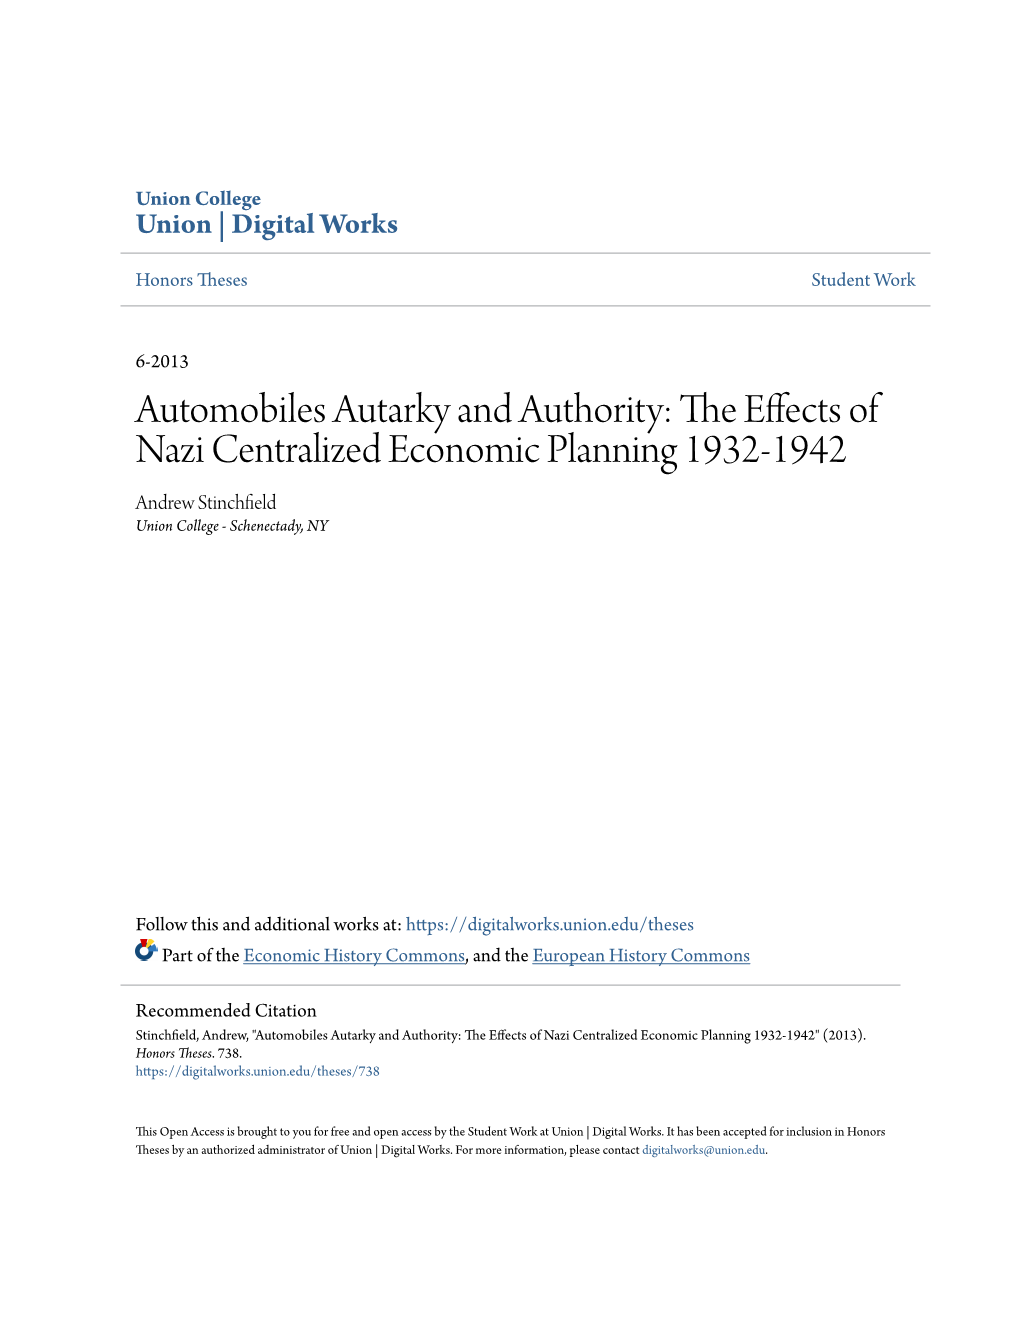 Automobiles Autarky and Authority: the Effects of Nazi Centralized Economic Planning 1932-1942" (2013)